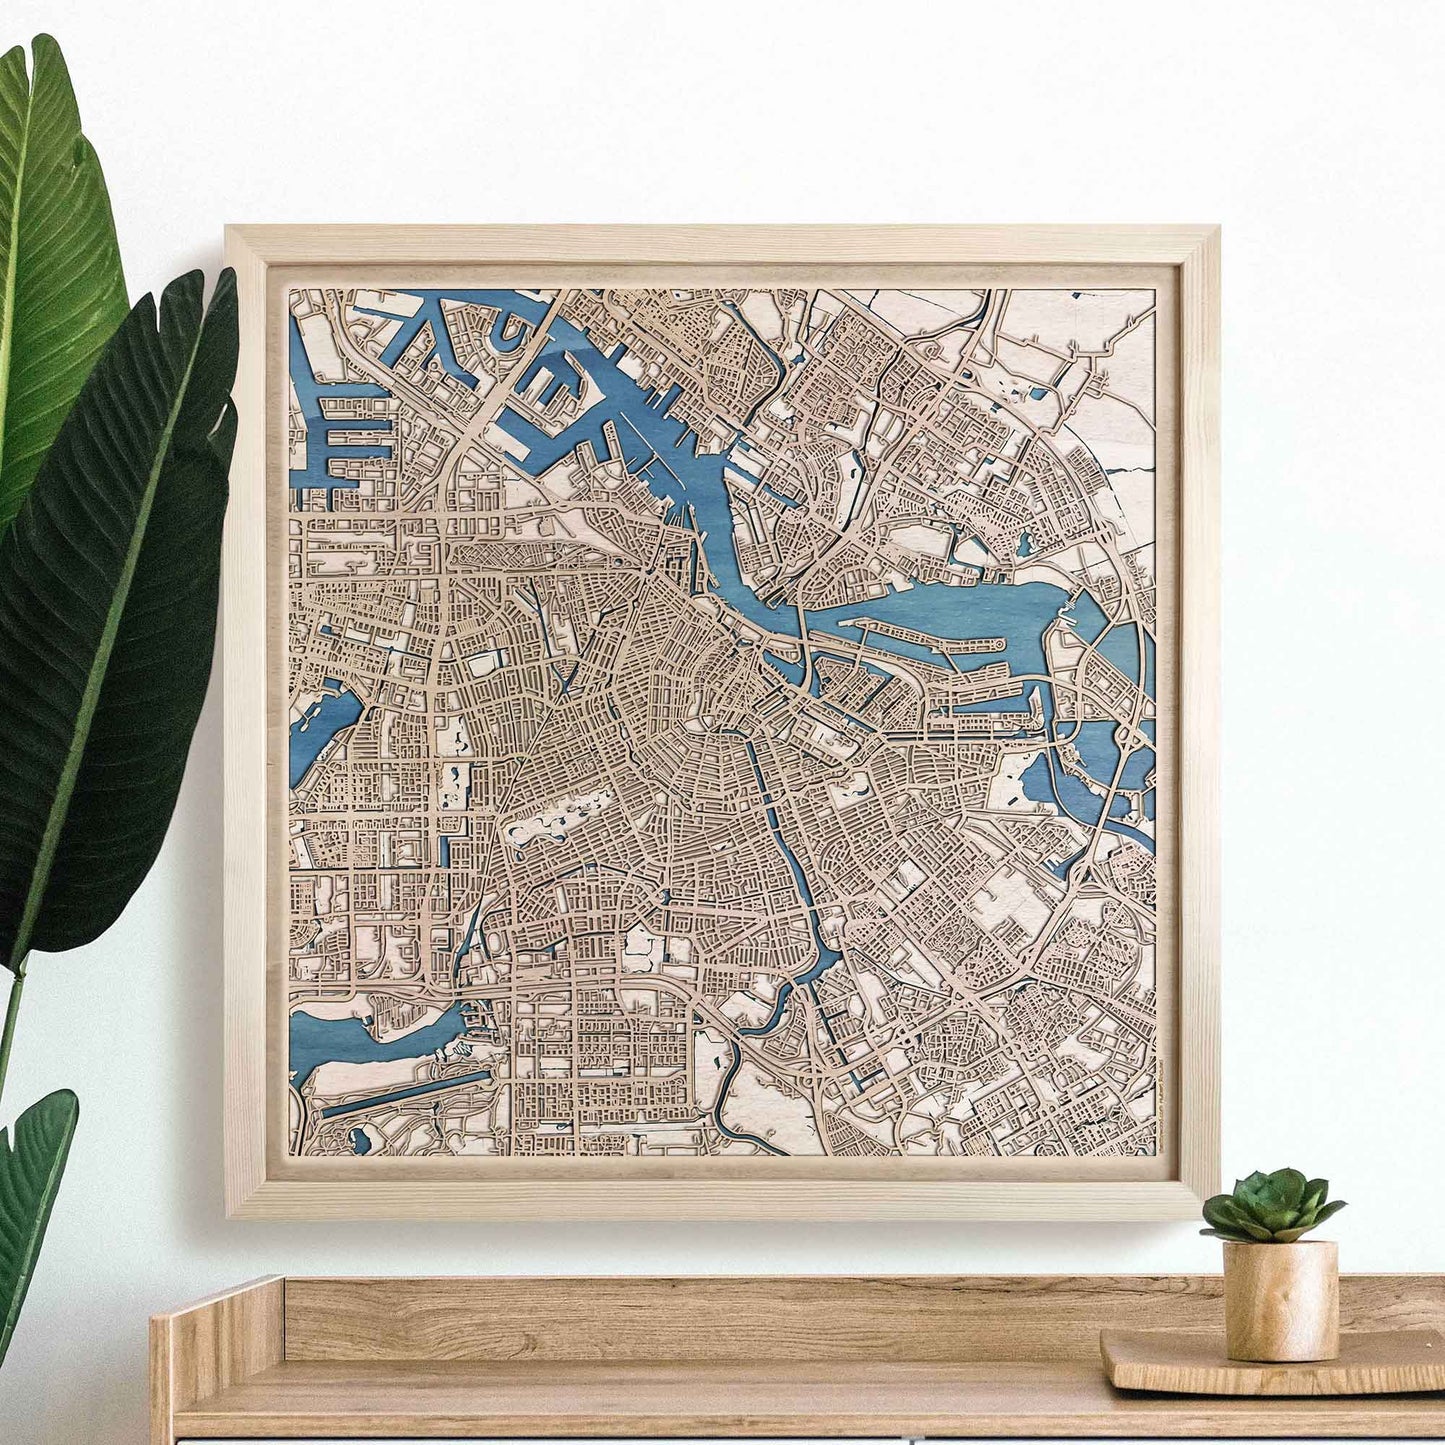 Amsterdam Wooden Map by CityWood - Custom Wood Map Art - Unique Laser Cut Engraved - Anniversary Gift